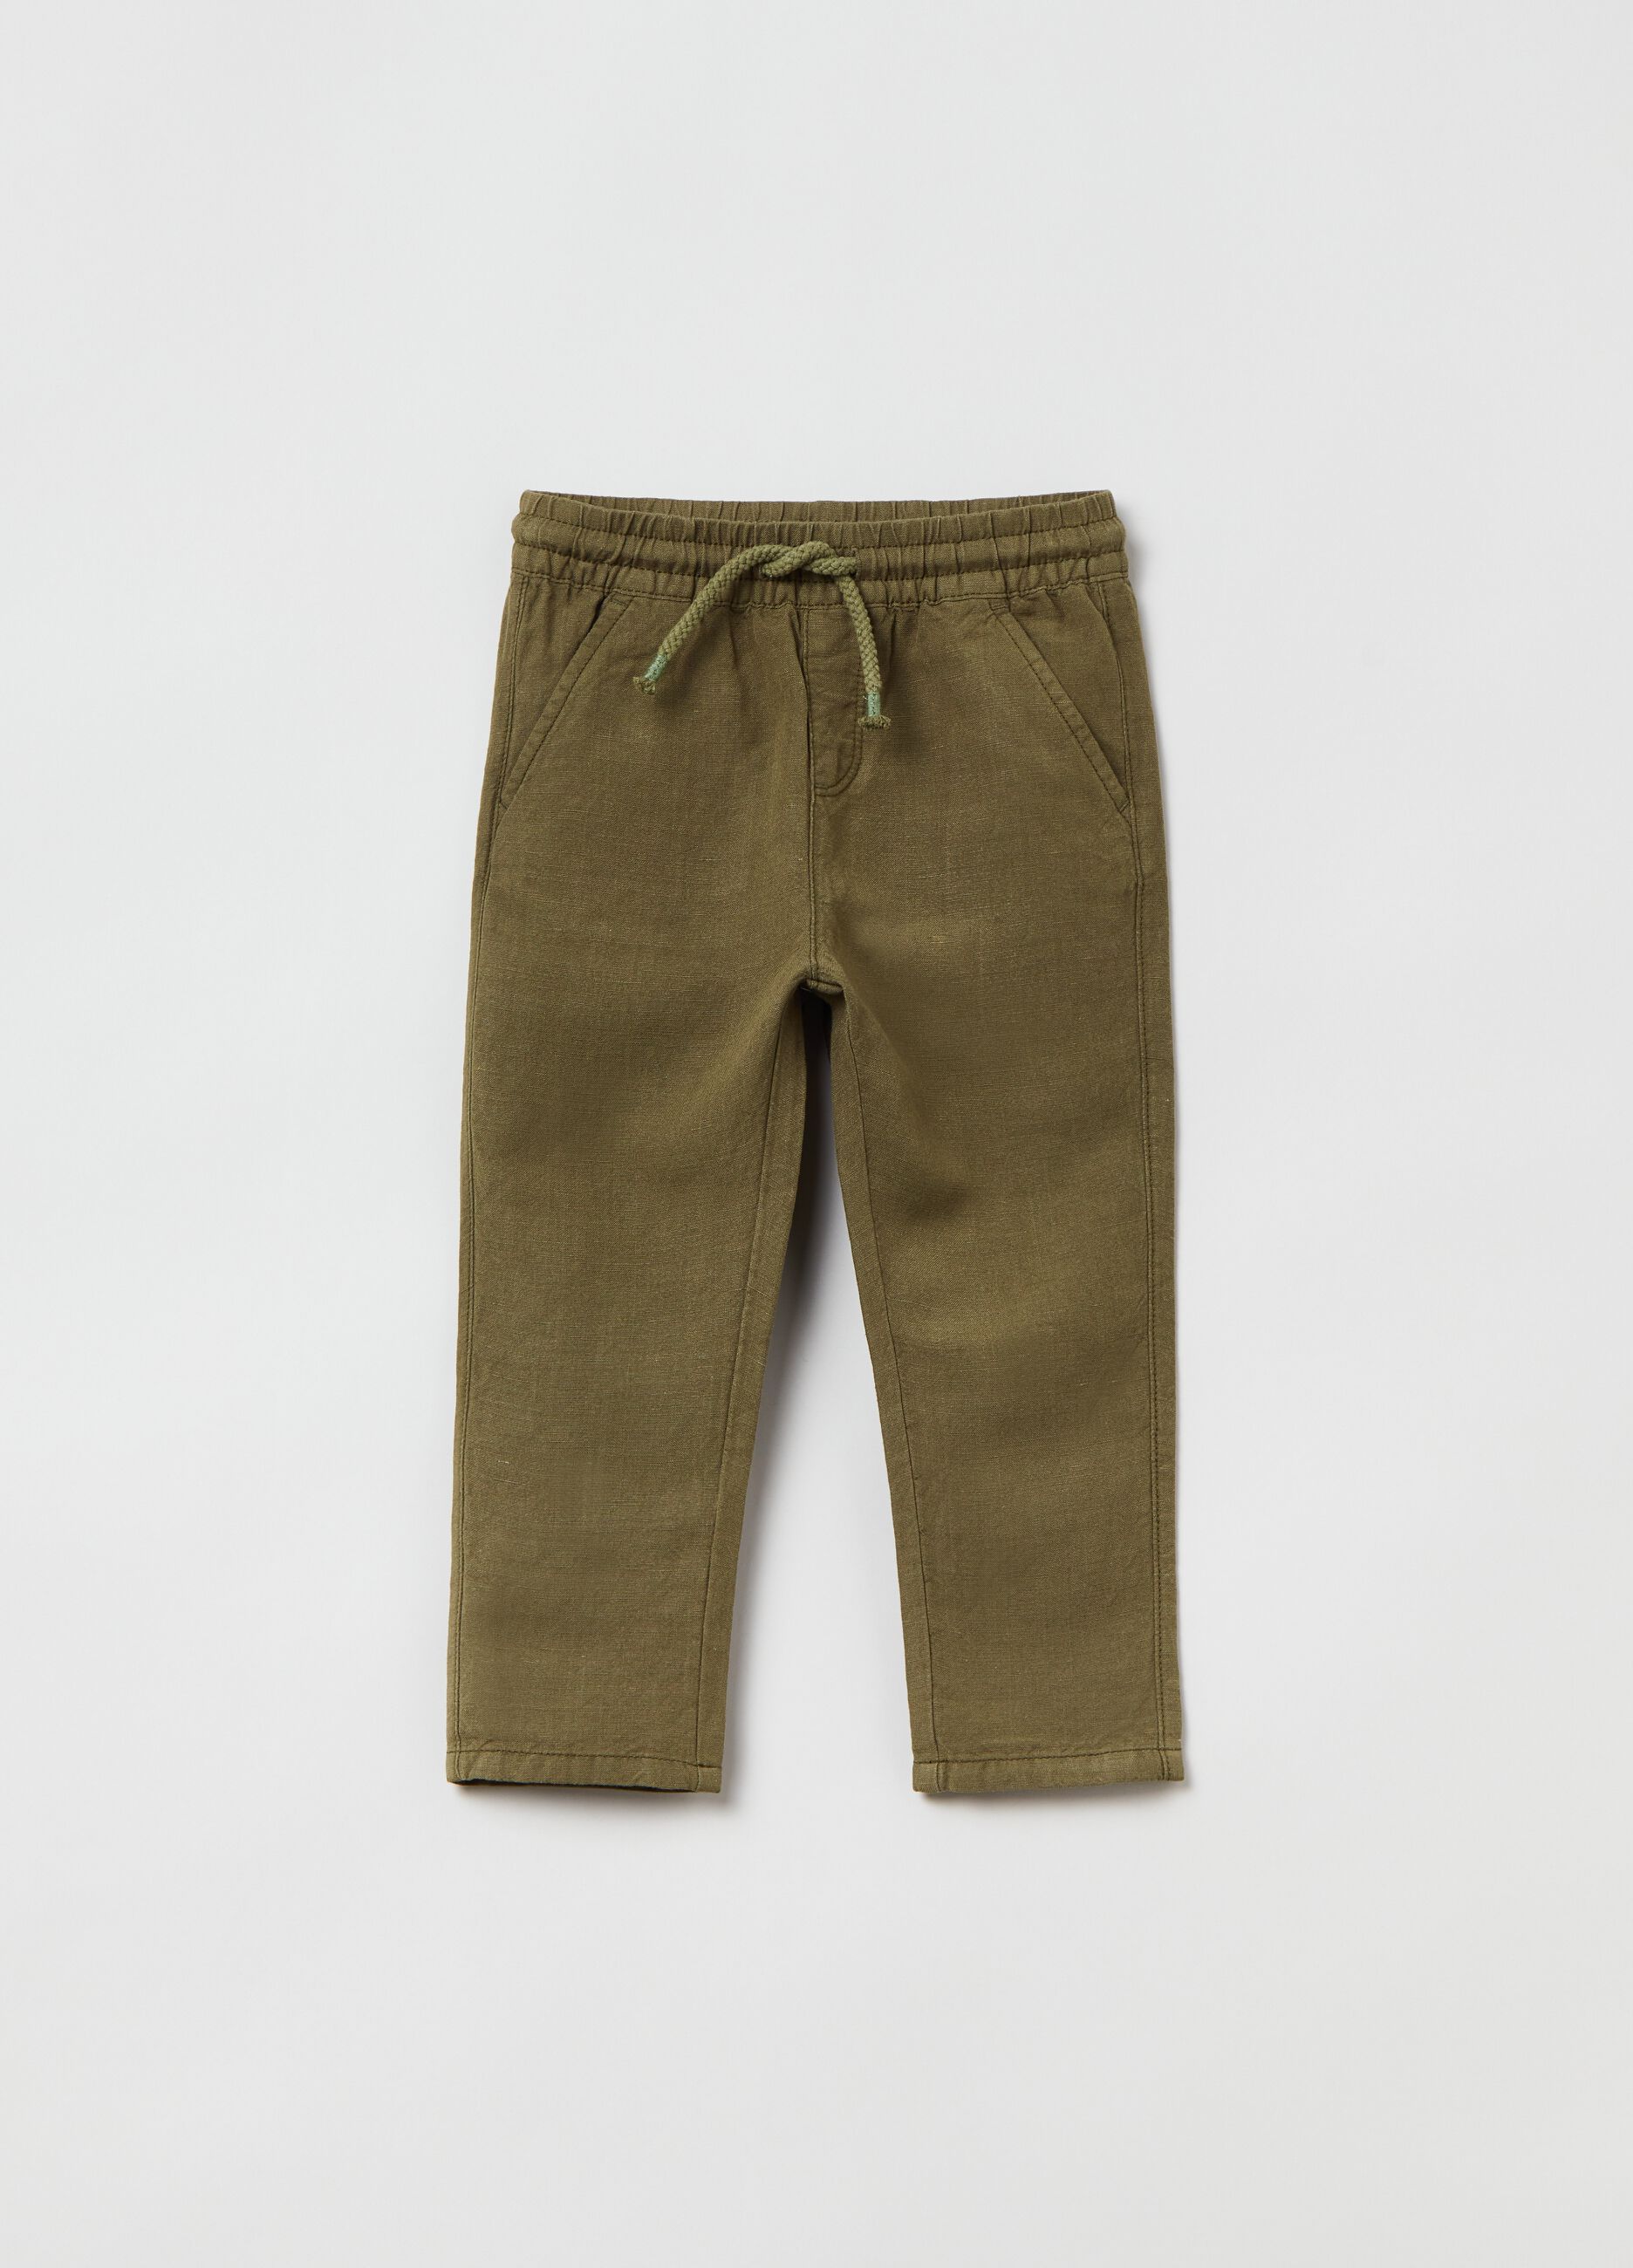 Viscose and linen trousers with drawstring